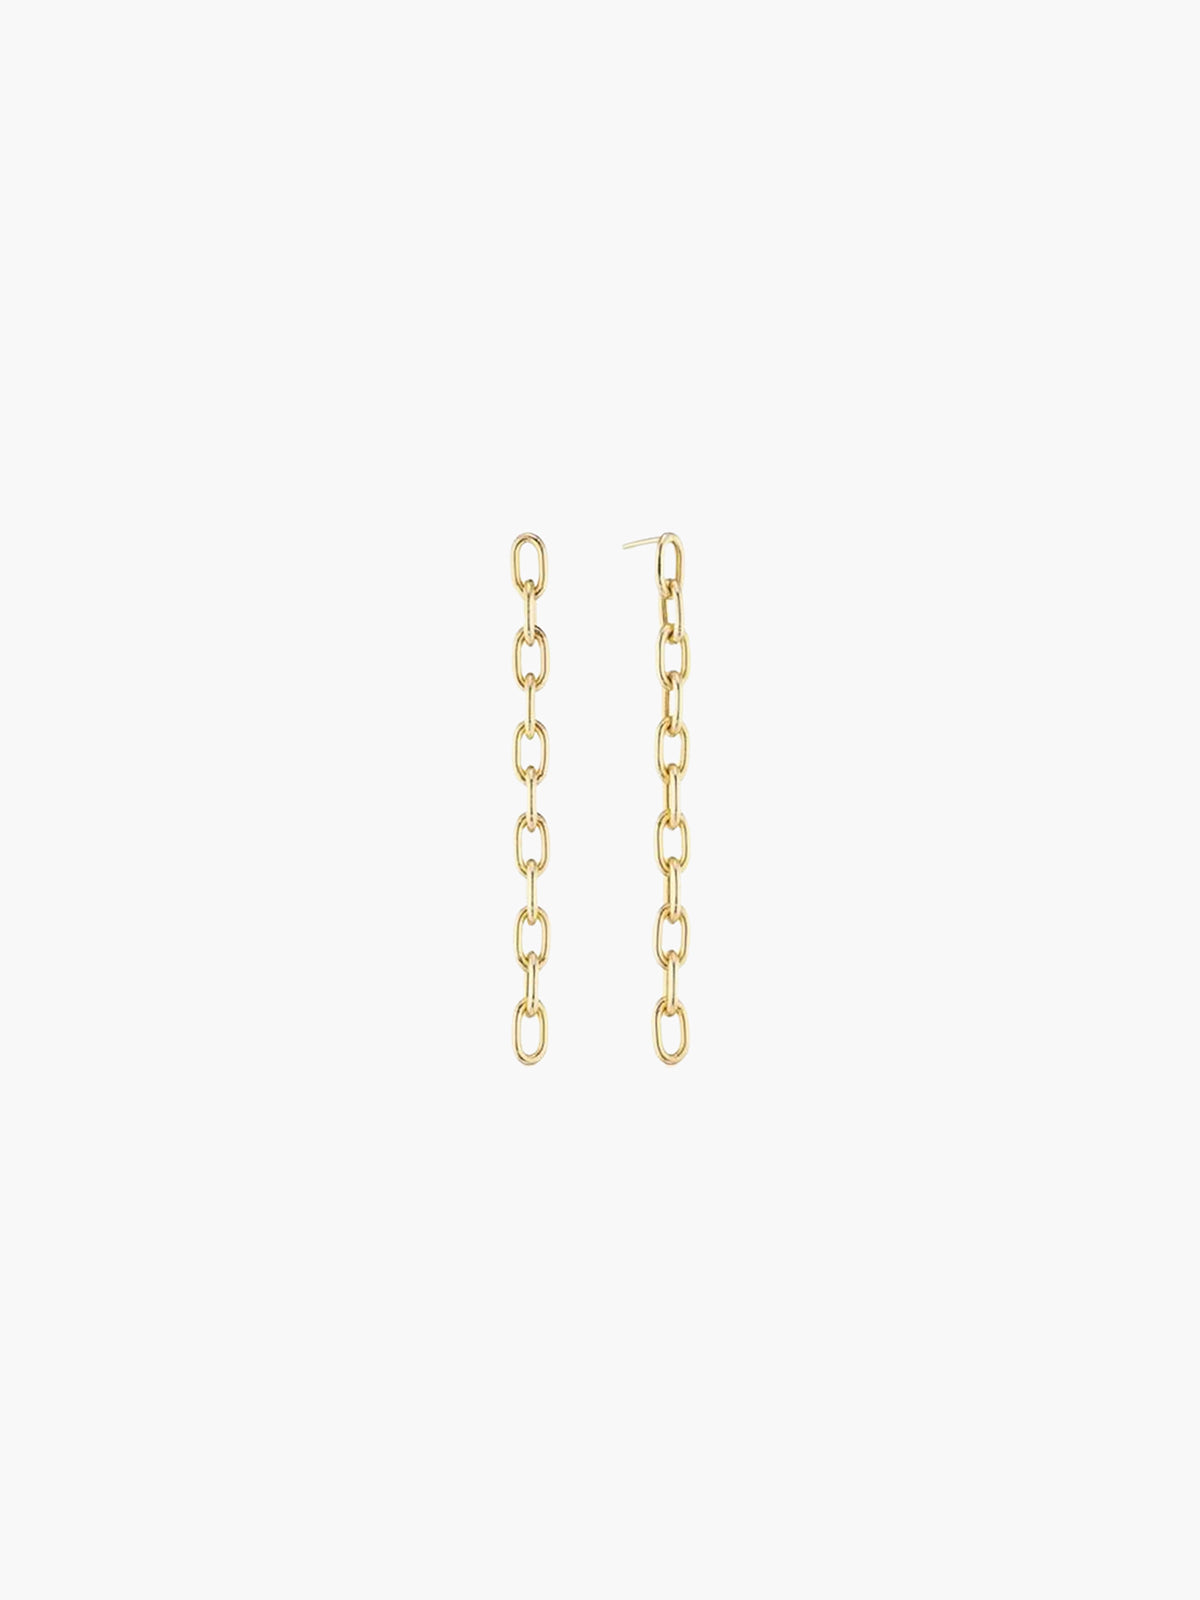 Elongated Thick Chain Link Earrings Long Elongated Thick Chain Link Earrings Long